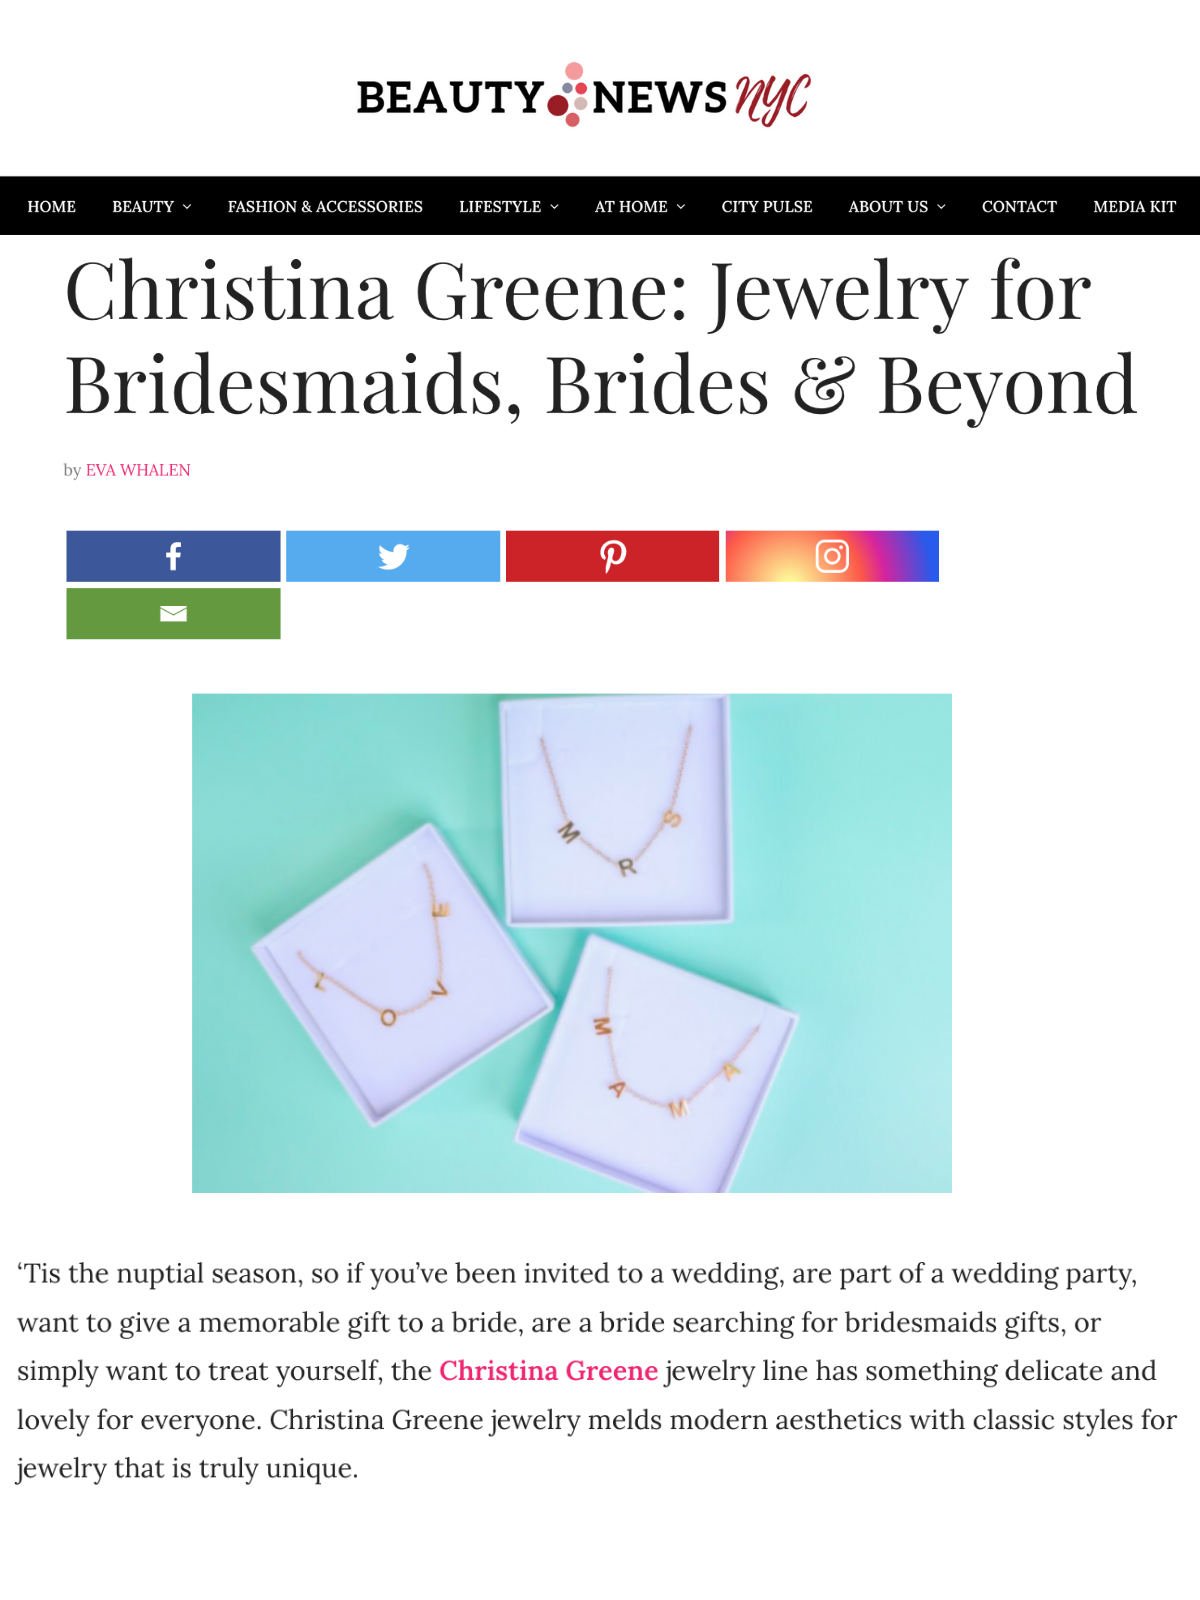 Screenshot of a blog post by Beauty News NYC about Christina Greene Jewelry's new MRS Necklace as a perfect gift for Brides and Brides-To-Be.